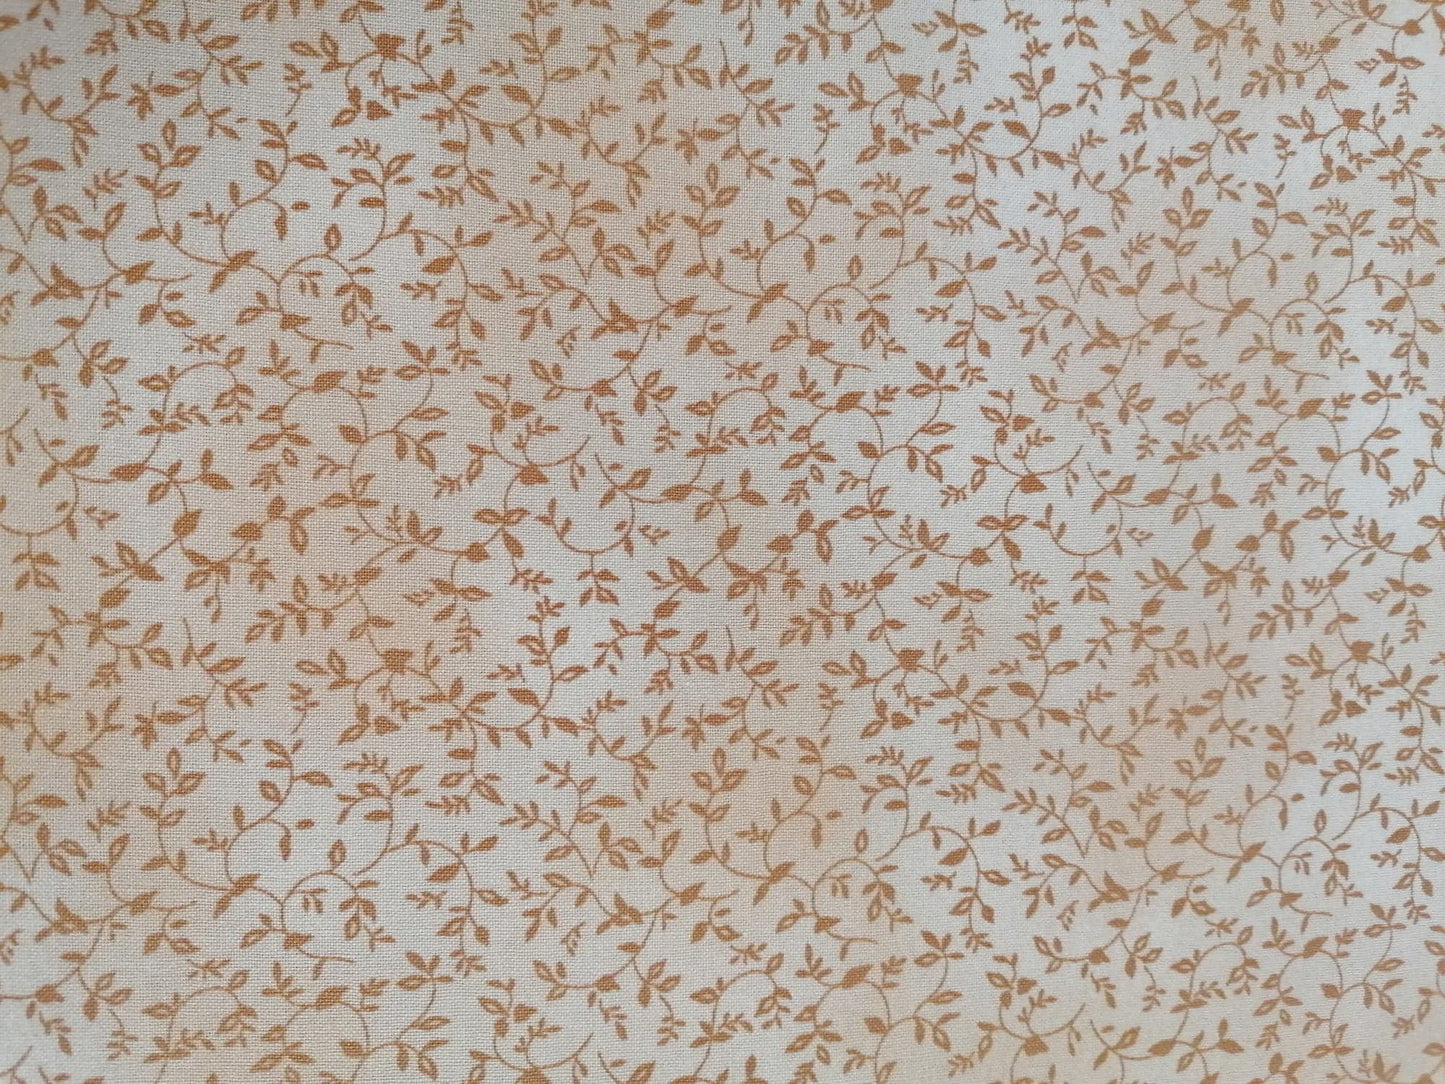 100% Cotton - Crafting & Quilting - Beige - 44" Wide - Sold By The Metre